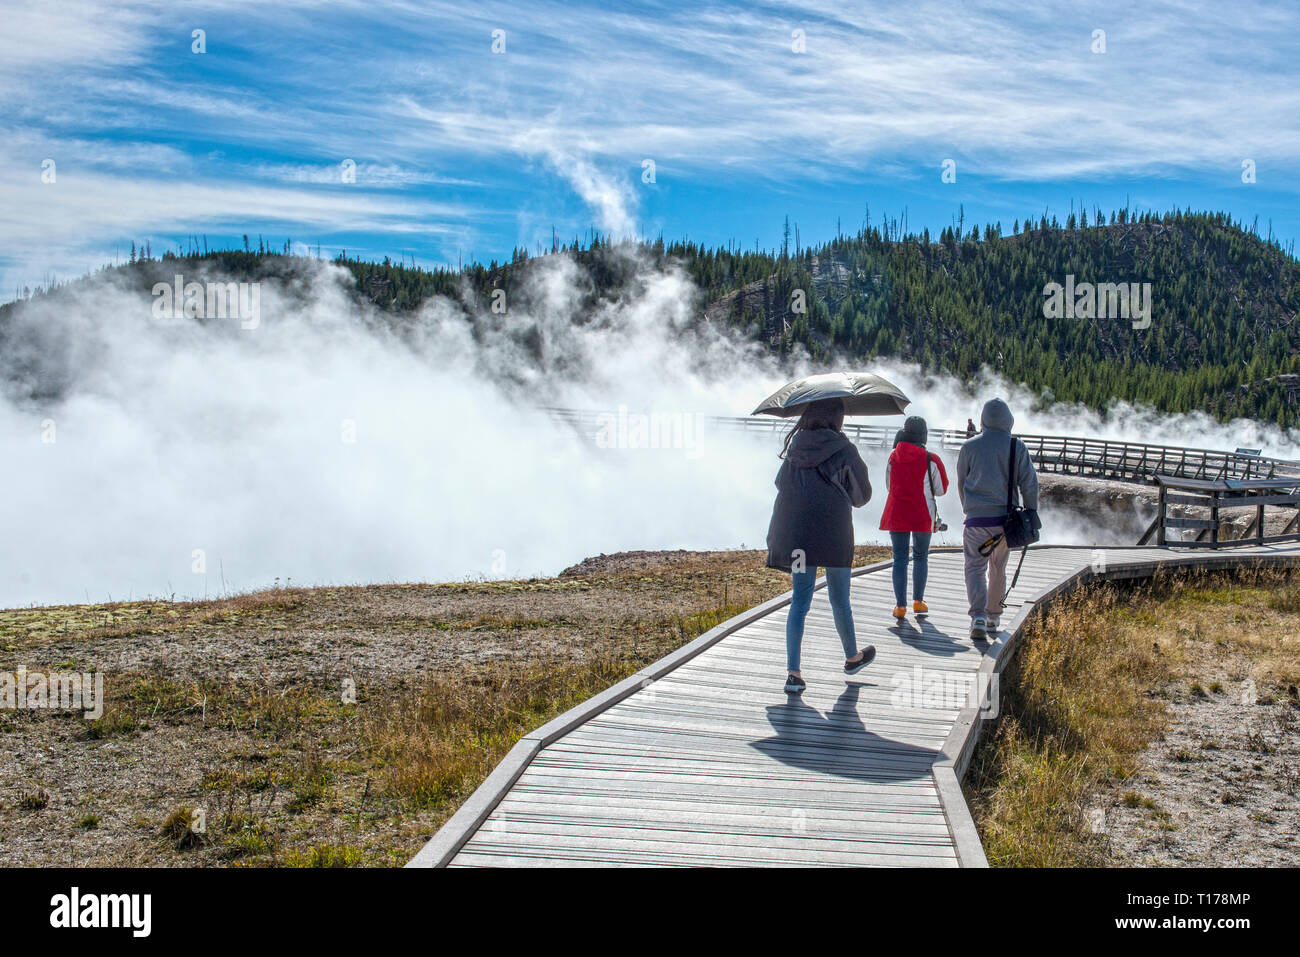 YELLOWSTONE, MONTANA USA, Tourists walk around the Grand Prismatic Spring in Yellowstone National park on a boardwalk surrounded by vapor. This geyser Stock Photo